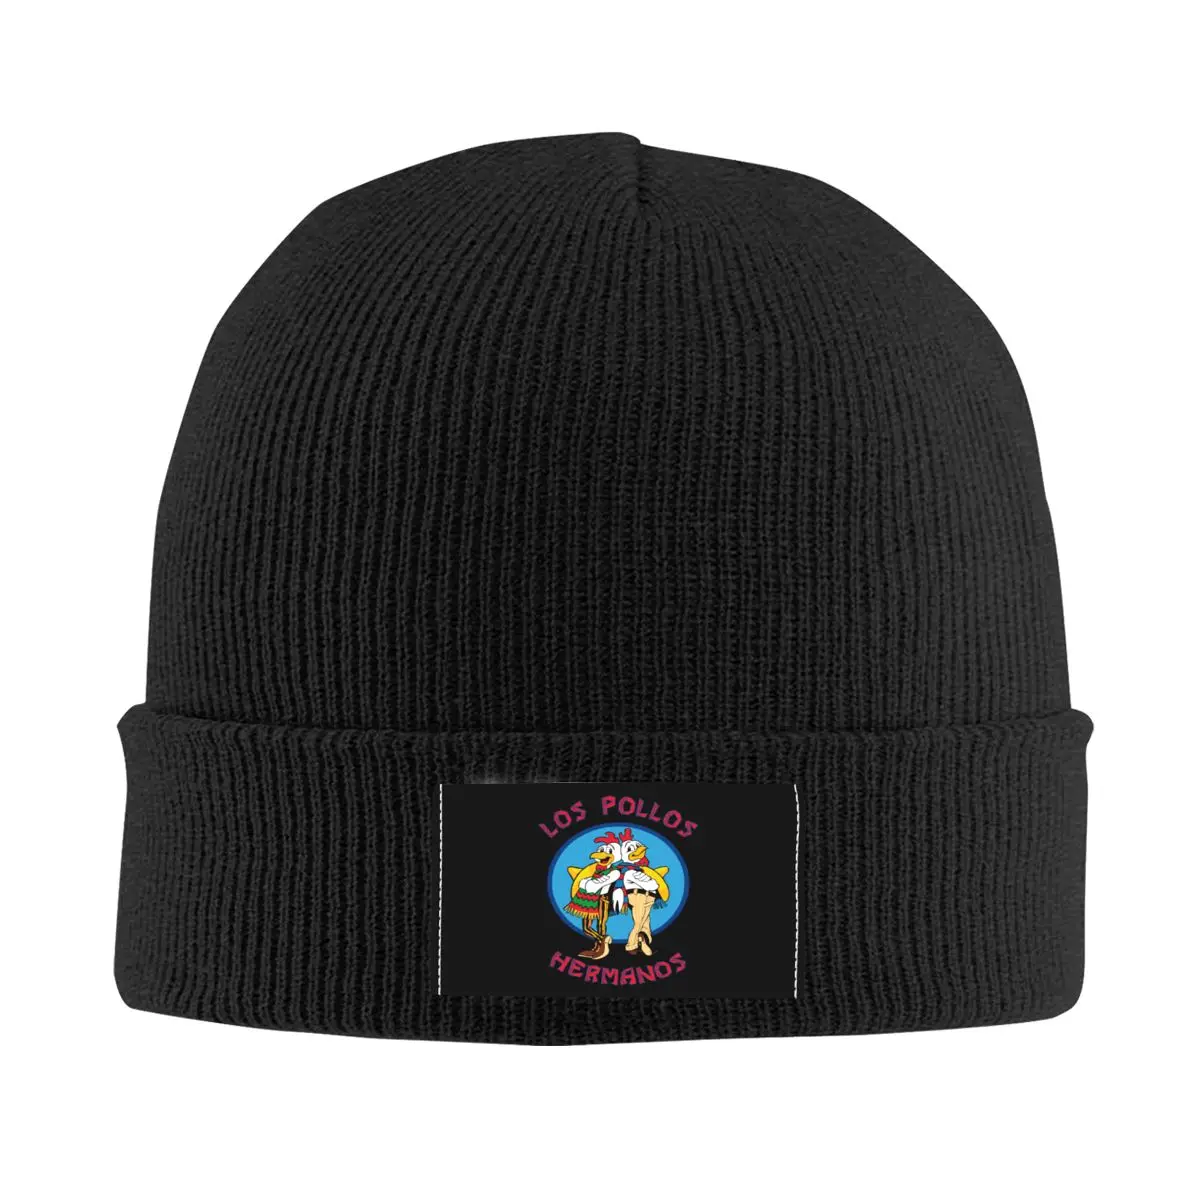 Los Pollos Hermanos Breaking Bad Skullies Beanies Caps Unisex Winter Warm Knitted Hat Adult The Chicken Brothers Bonnet Hats 1